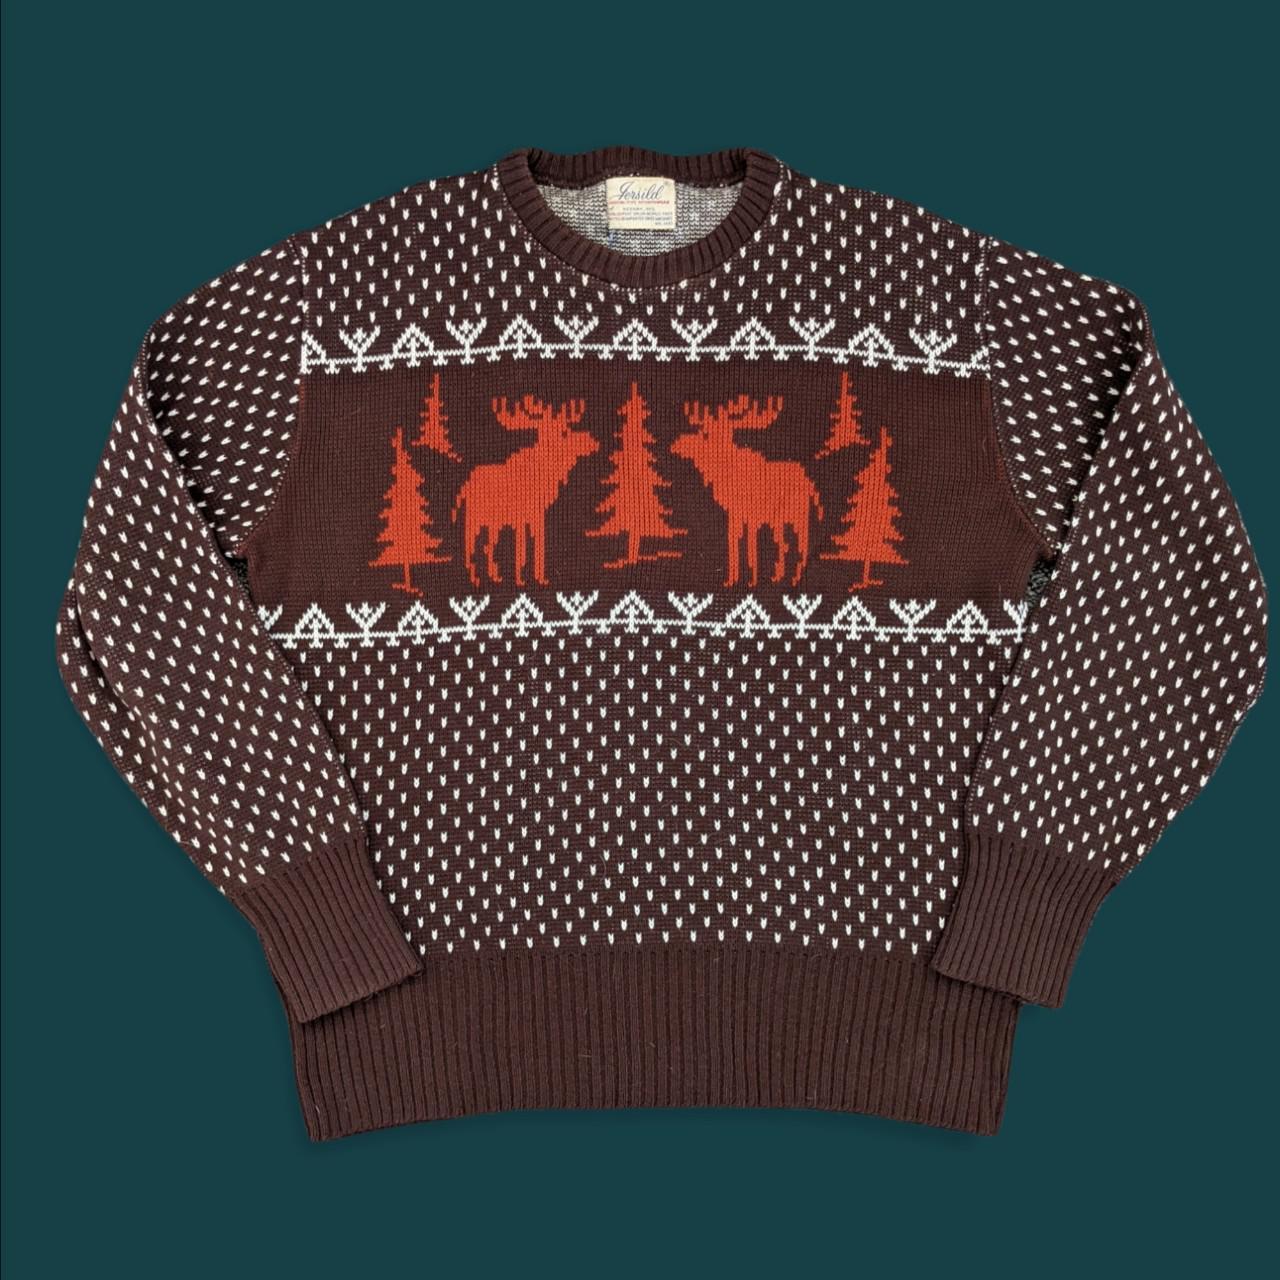 Product Image 1 - 60s Christmas Sweater

From Jersild of